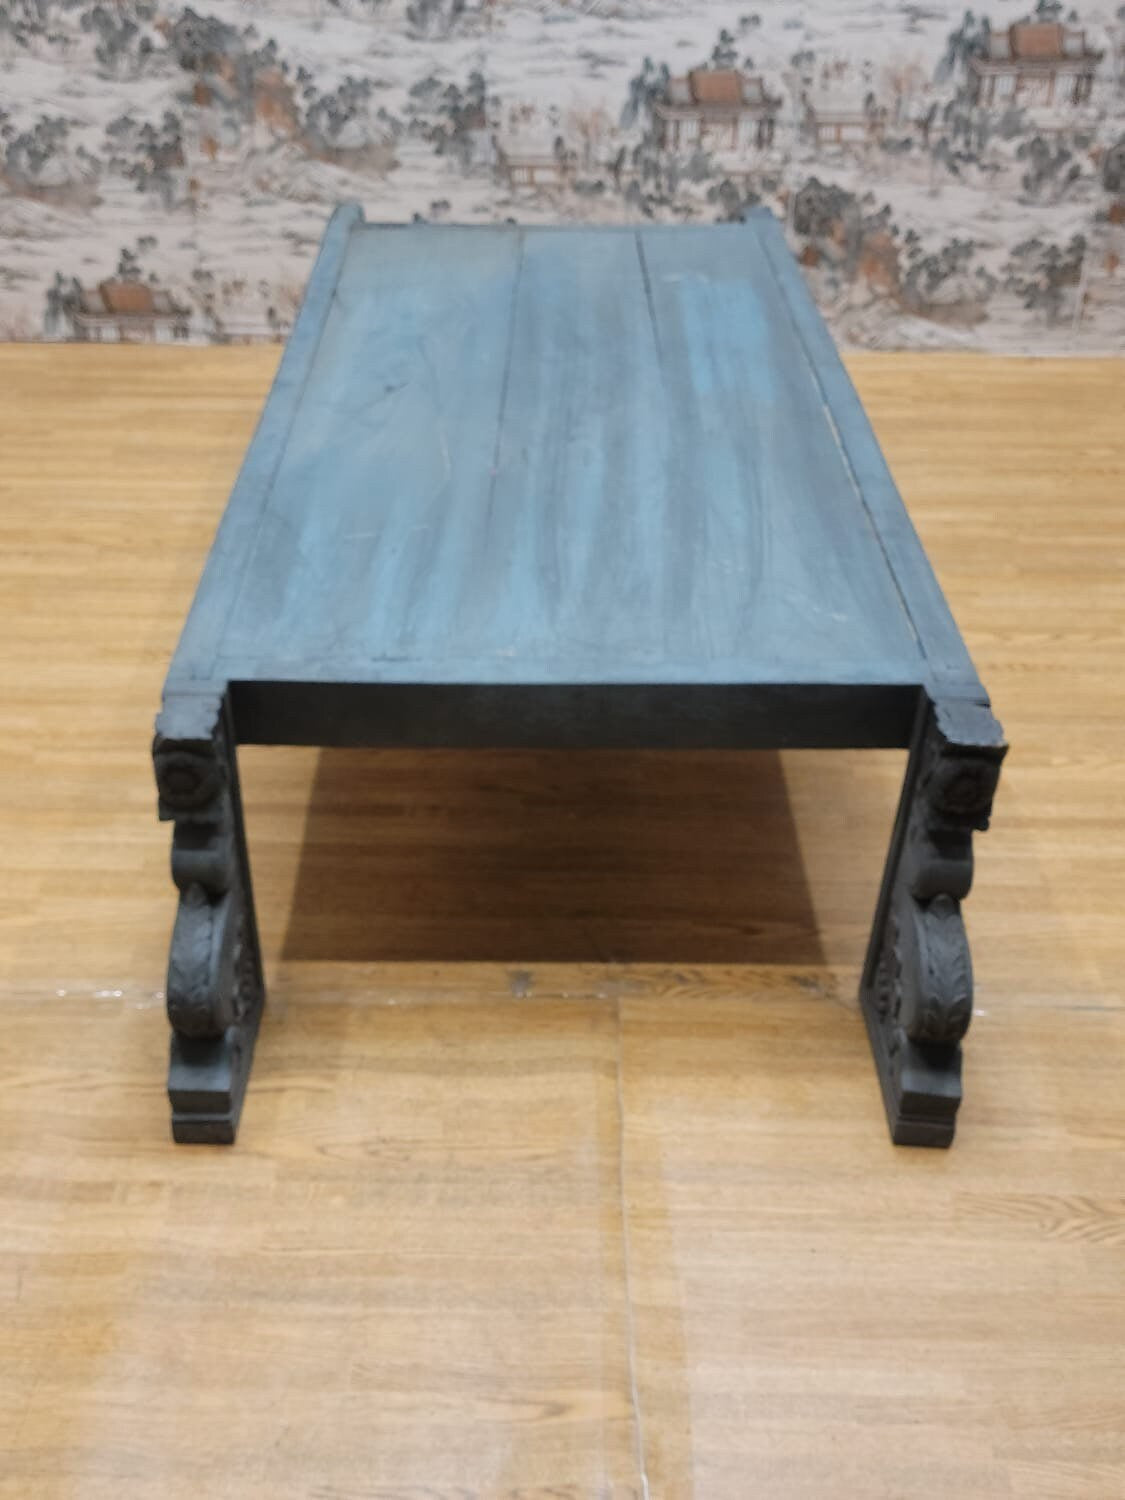 Shanxi Province Slate Elmwood Coffee Table with Carved Legs